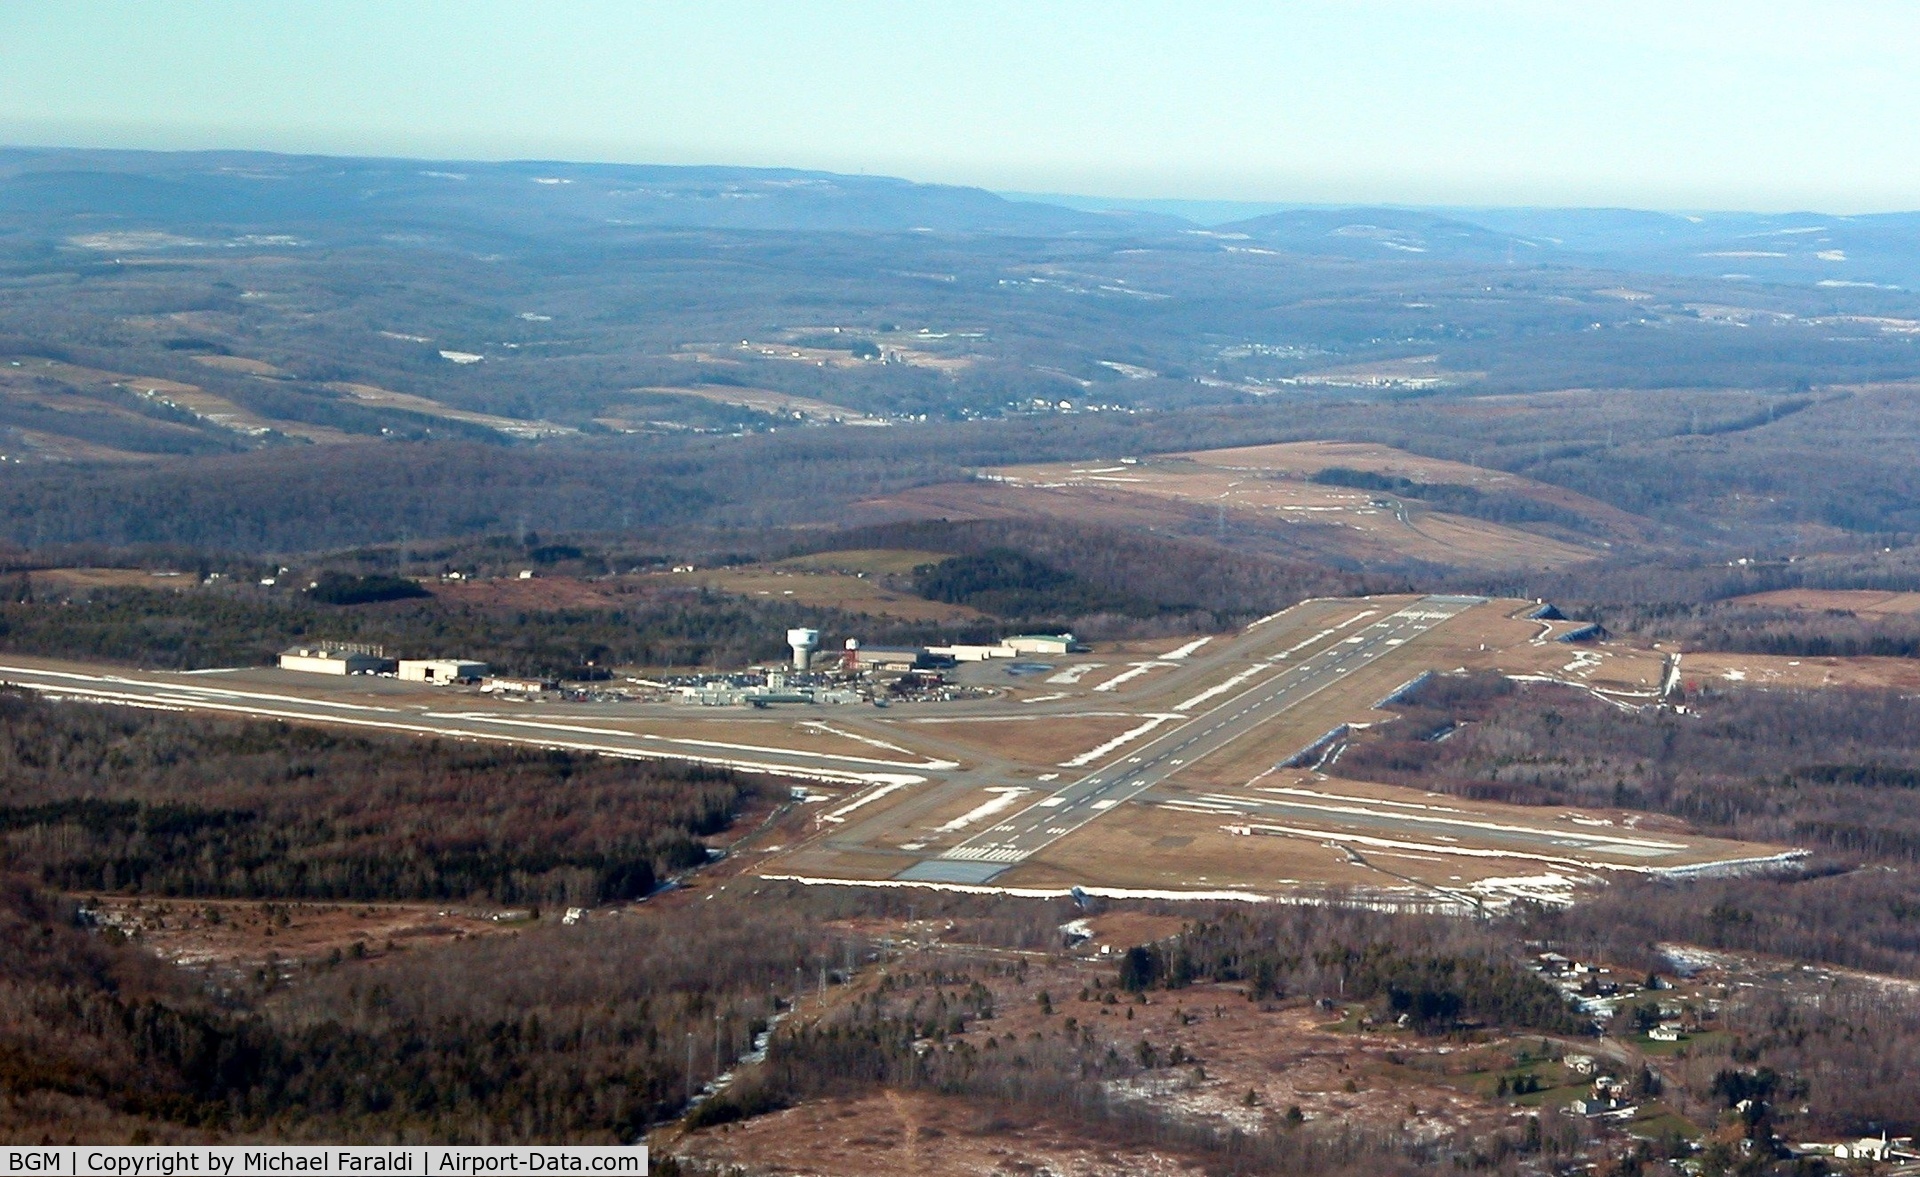 Greater Binghamton/edwin A Link Field Airport (BGM) - greater bgm airport